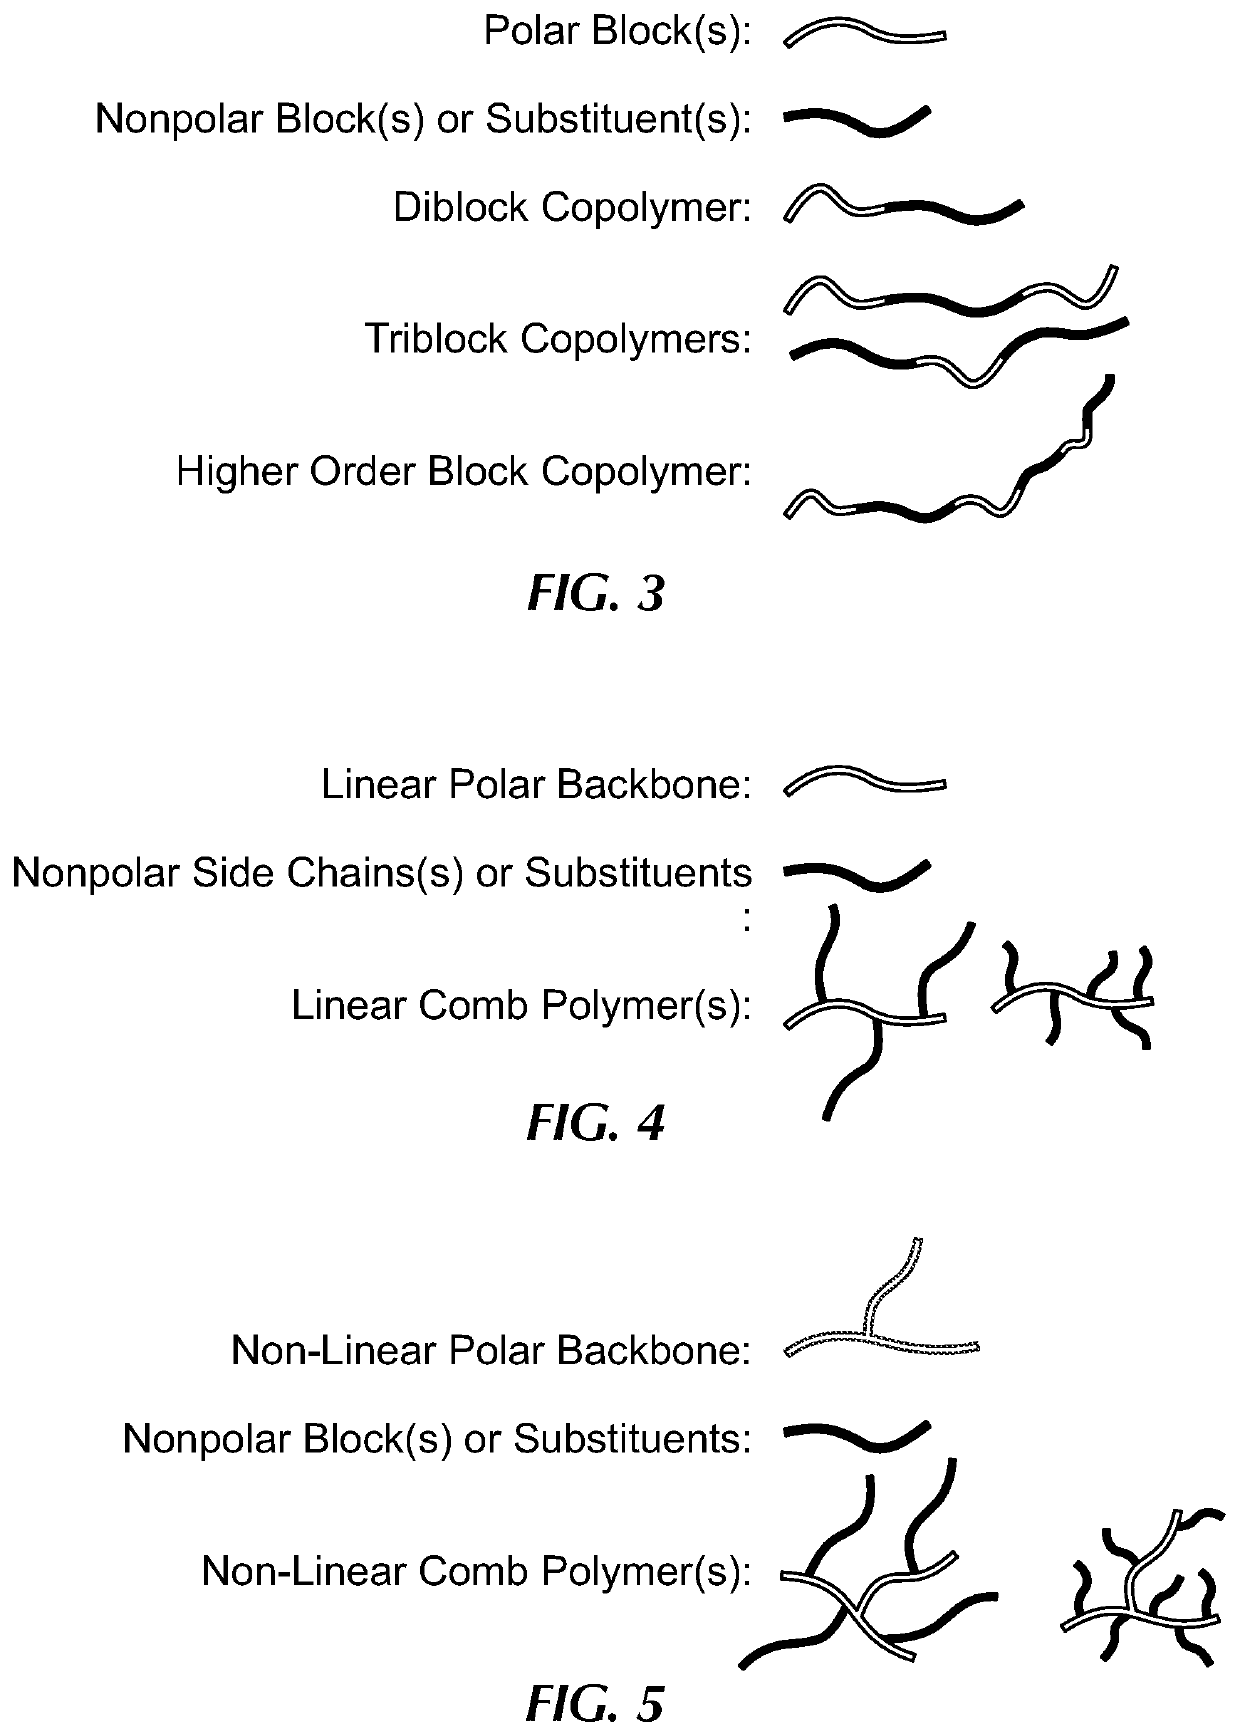 Comb polymer and block copolymer stabilized nanoparticles encapsulating nucleic acids and other soluble hydrophilic compounds